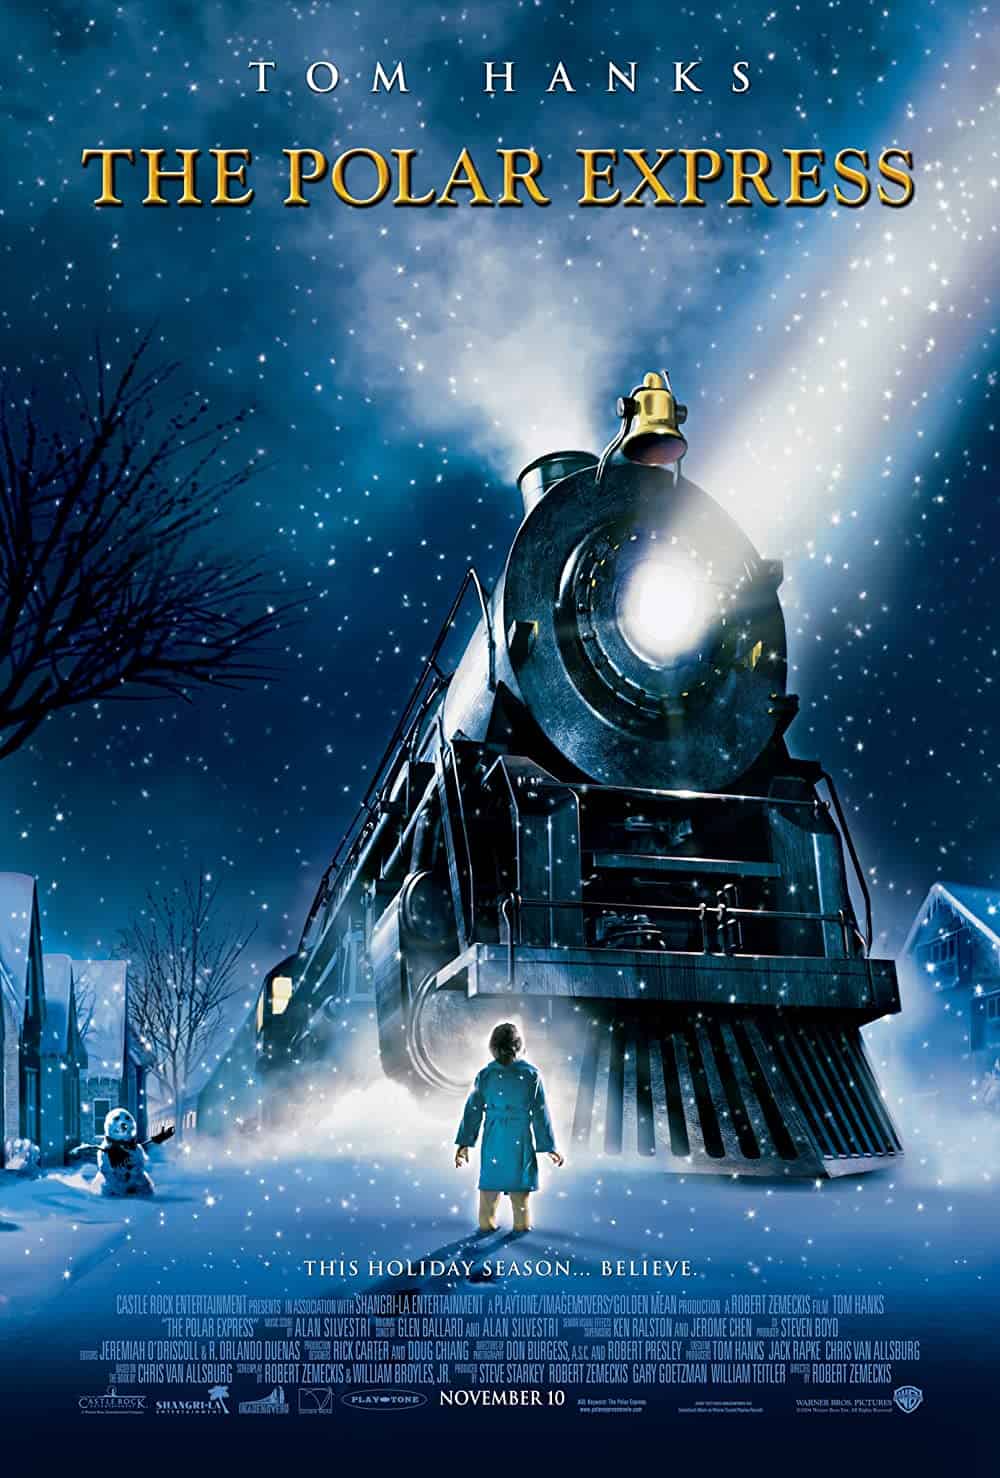 The Polar Express (2004) Best Train Movies You Can't Miss